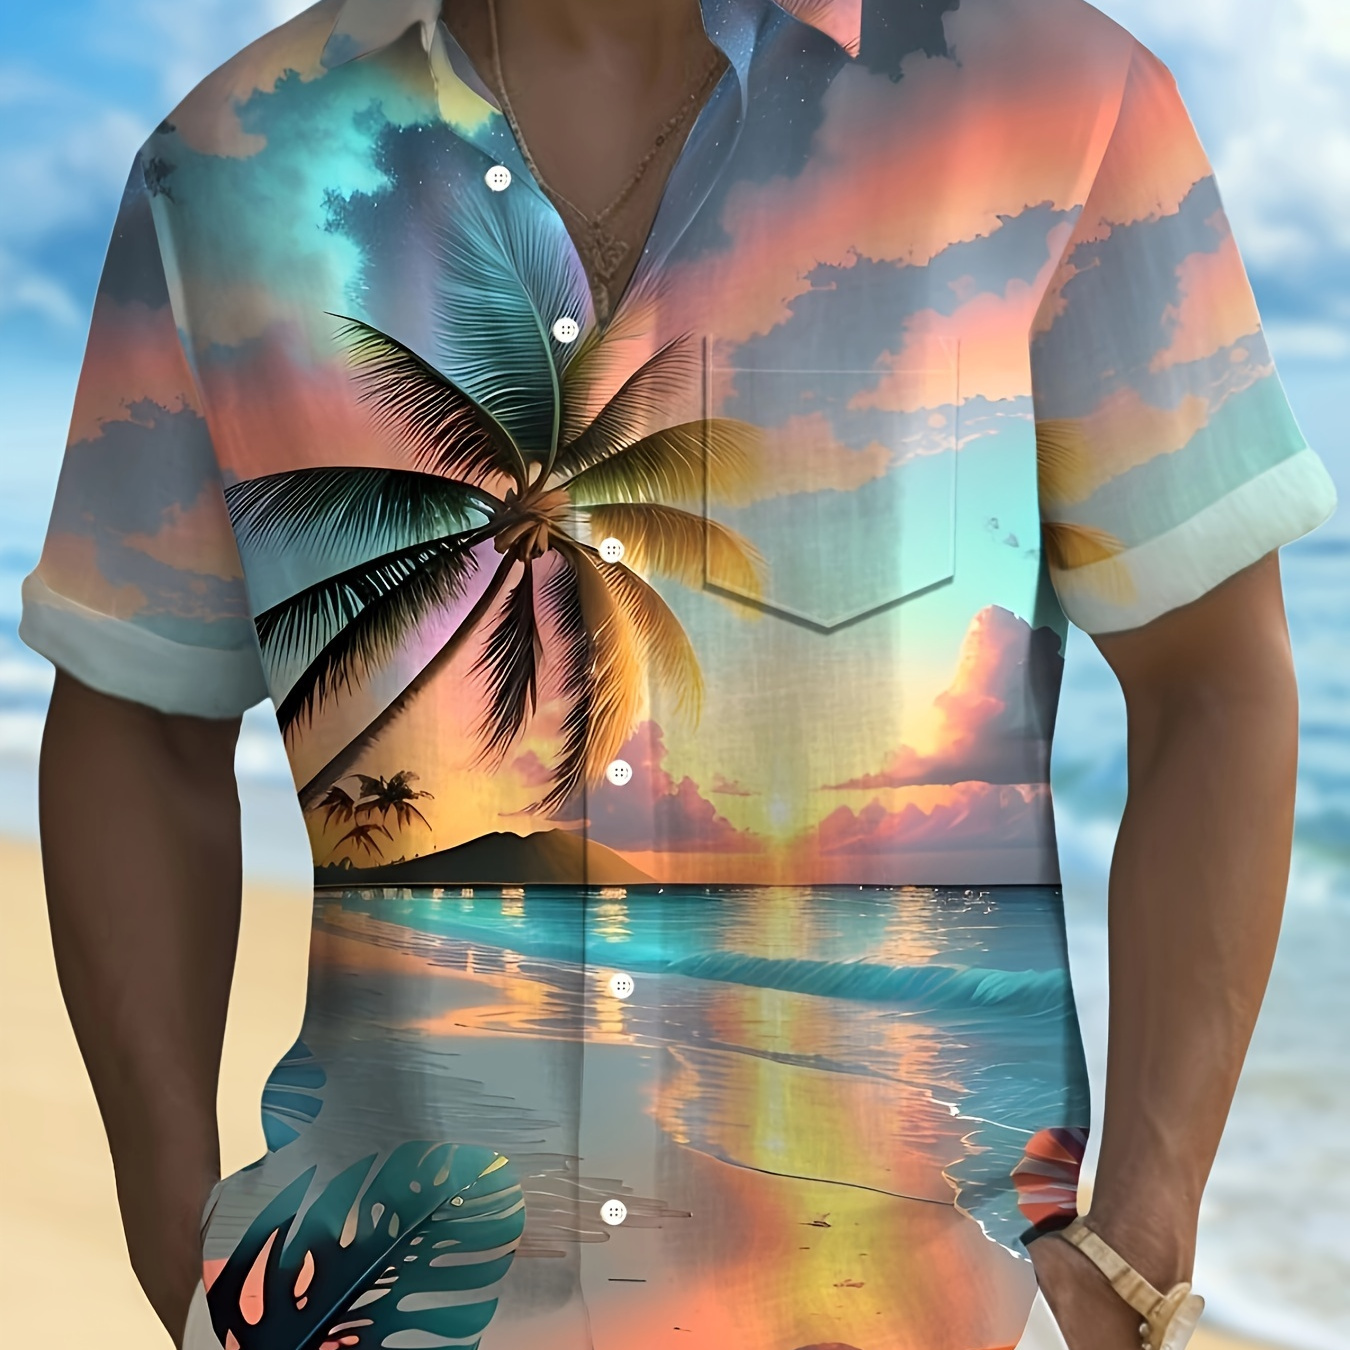 

Hawaiian Sunset Coconut Tree Beach 3d Print Men's Button Up Front Pocket Short Sleeve Shirt, Comfy & Breathable Top Men's Clothing For Spring Summer Holiday As Gifts